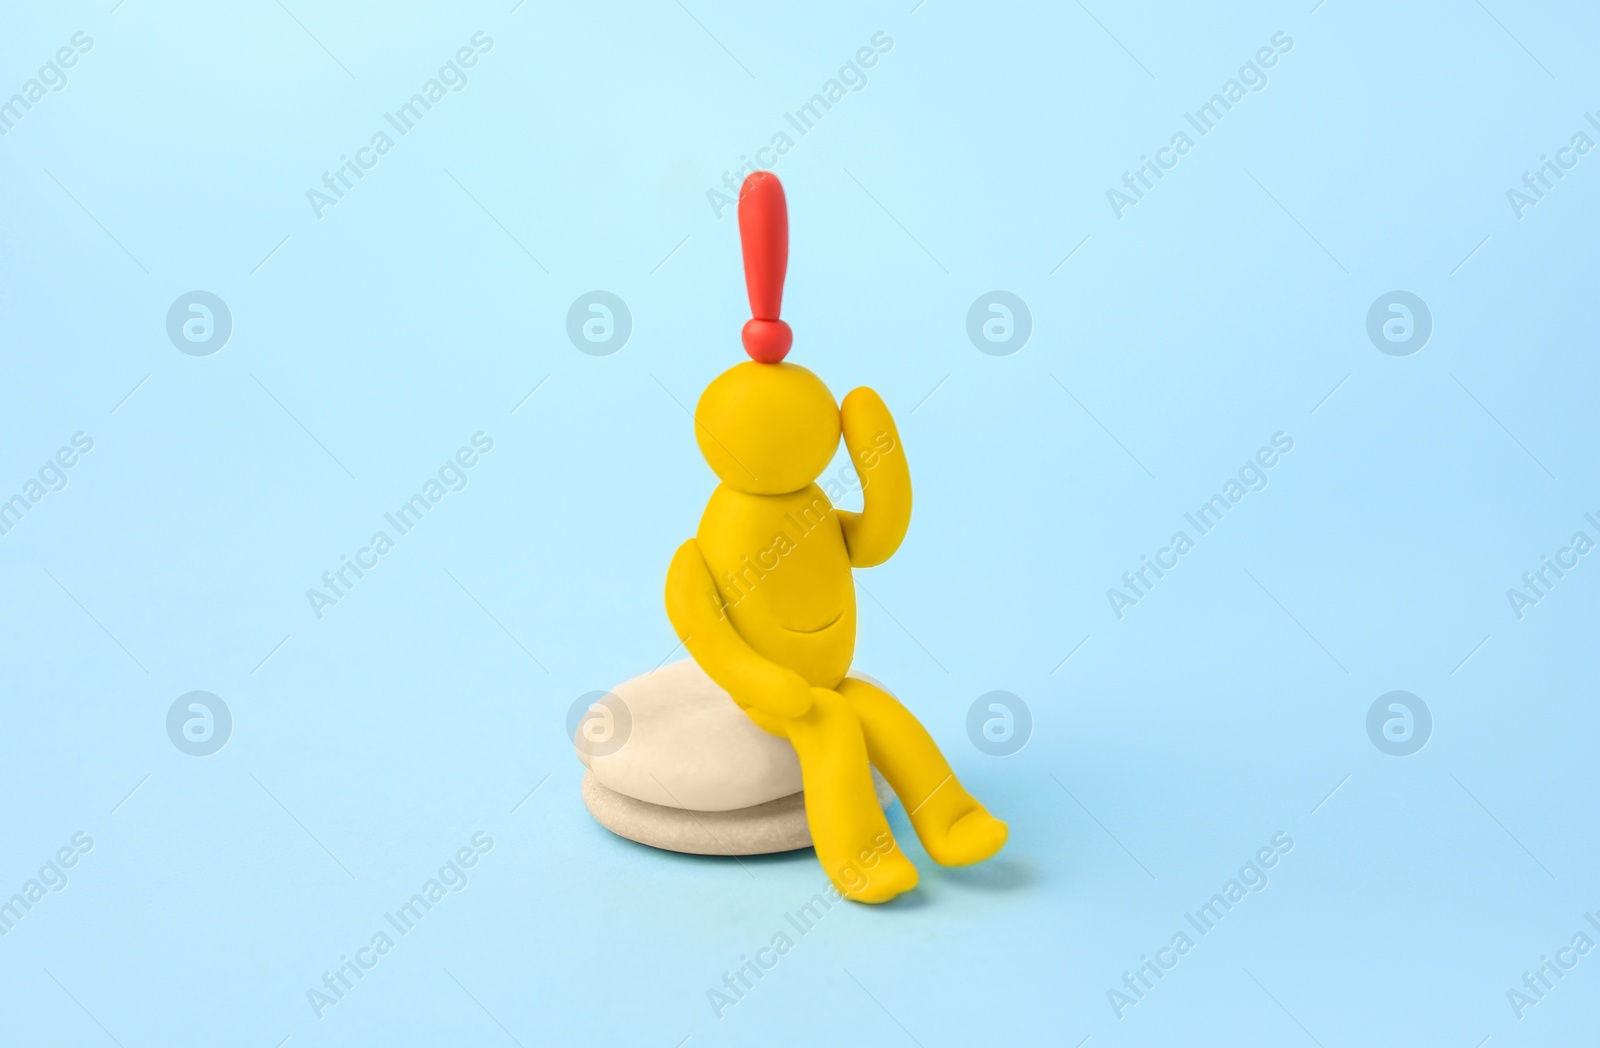 Photo of Human figure made of yellow plasticine with exclamation mark as solution idea on light blue background